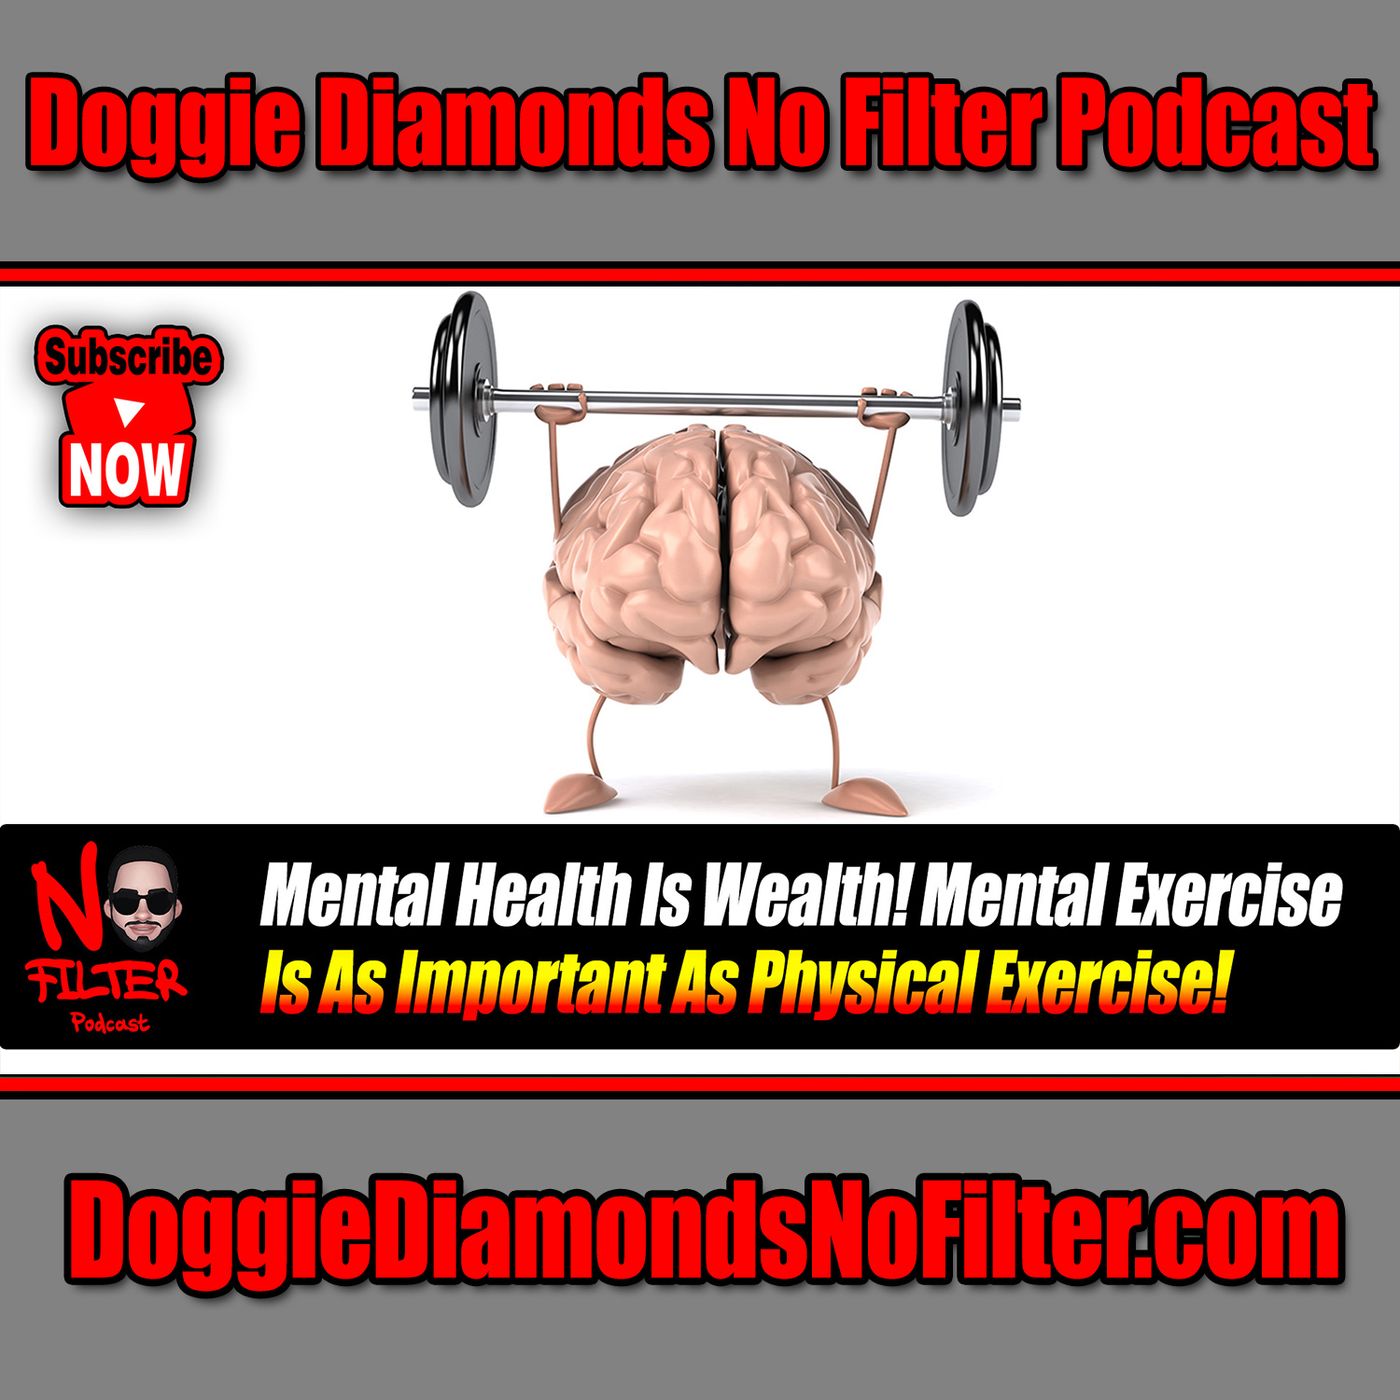 Mental Health Is Wealth! Mental Exercise Is As Important As Physical Exercise!